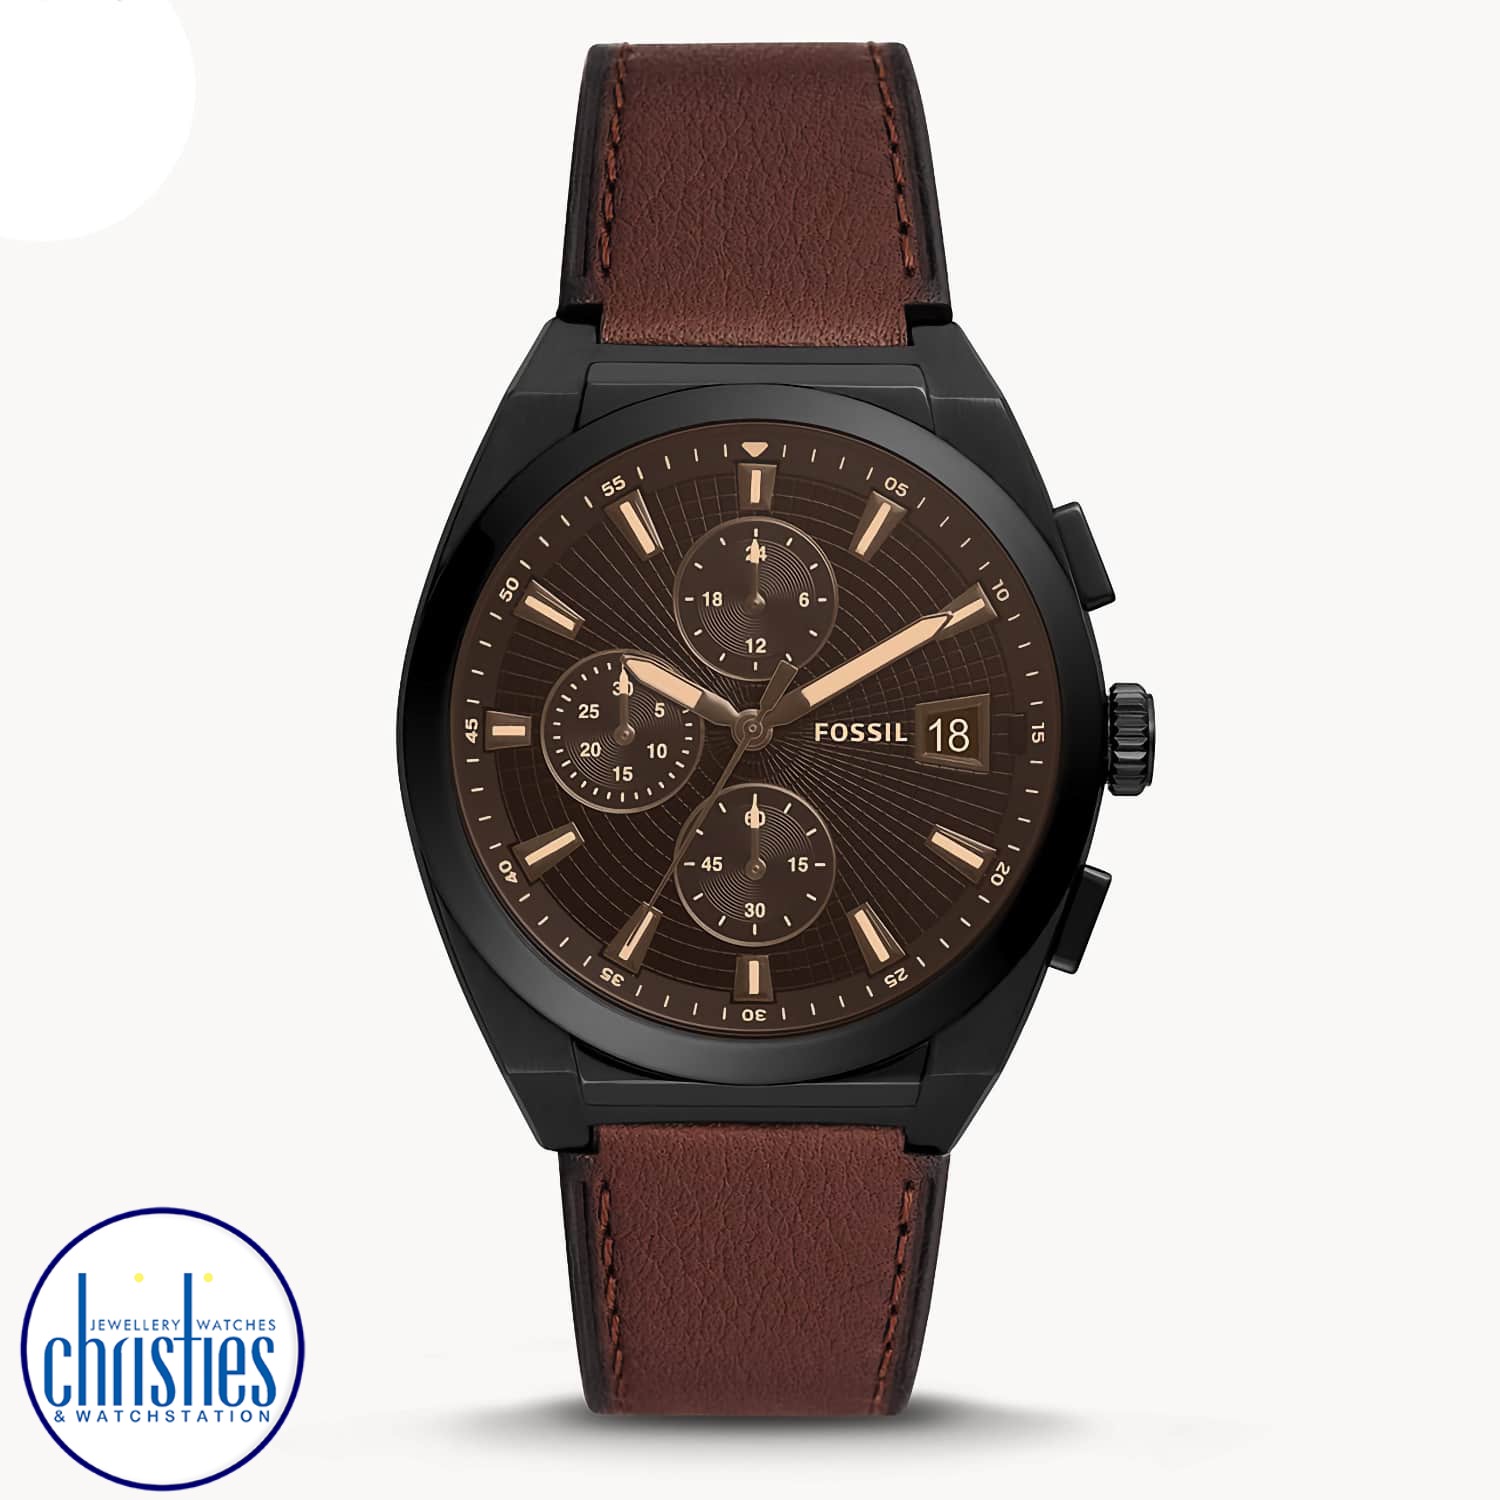 fs5798 Fossil Everett Chronograph Brown Leather Watch. fs5798 Fossil Everett Chronograph Brown Leather Watch Afterpay - Split your purchase into 4 instalments - Pay for your purchase over 4 instalments, due every two weeks. You’ll pay your first installme